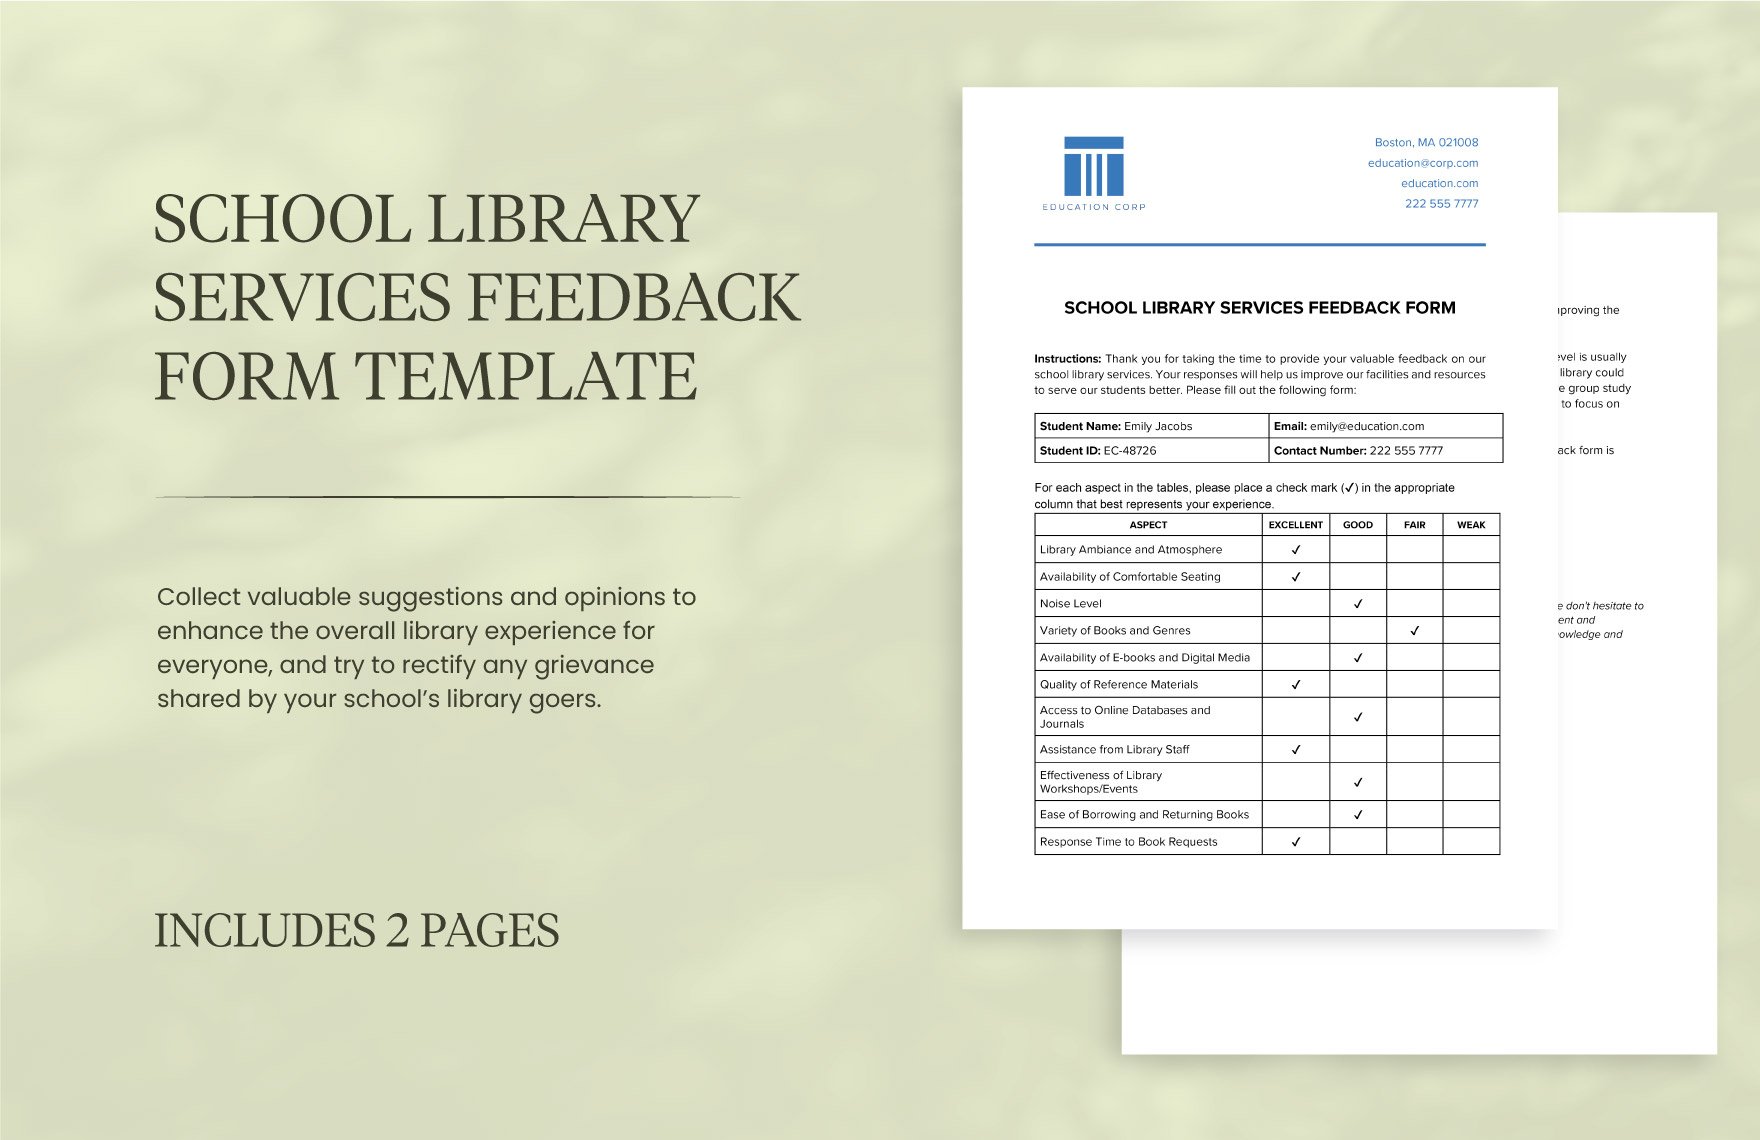 School Library Services Feedback Form Template in Word, Google Docs, PDF